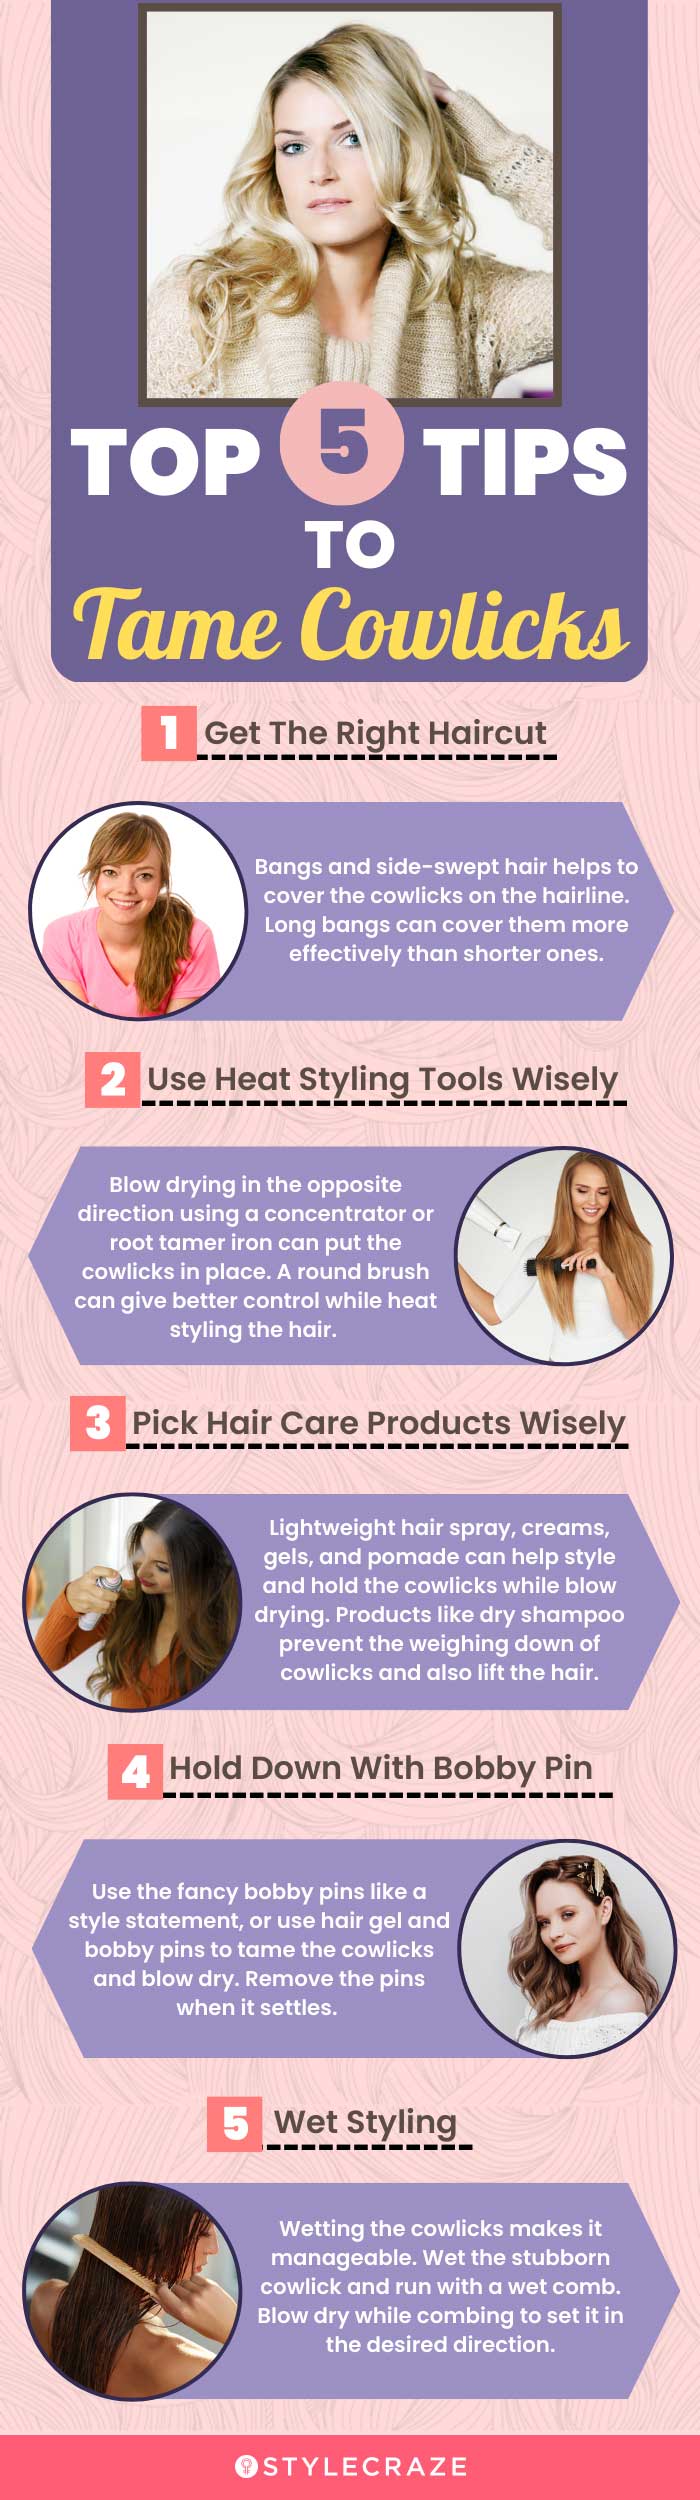 top 5 tips to tame cowlicks (infographic)